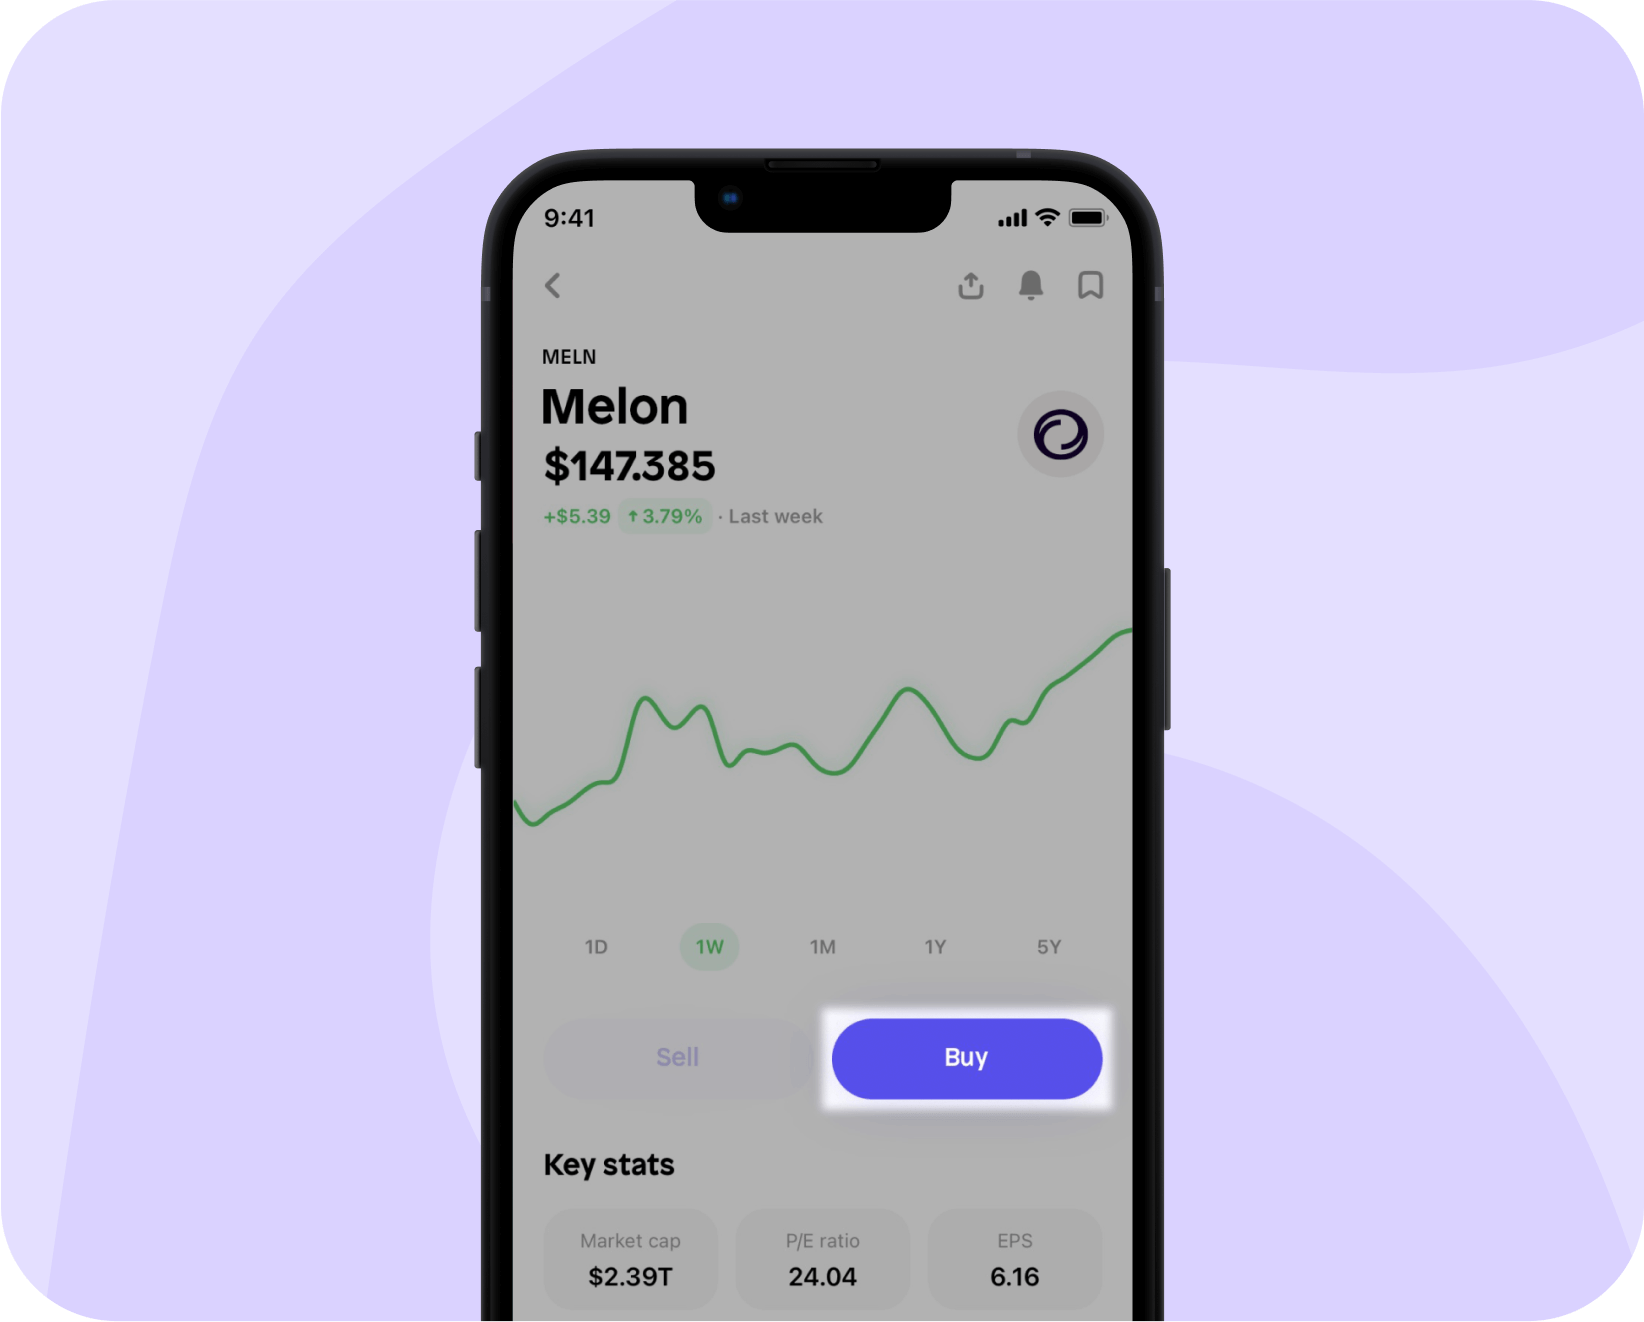 Buy button on the Shares app - how to buy stocks on the Shares app